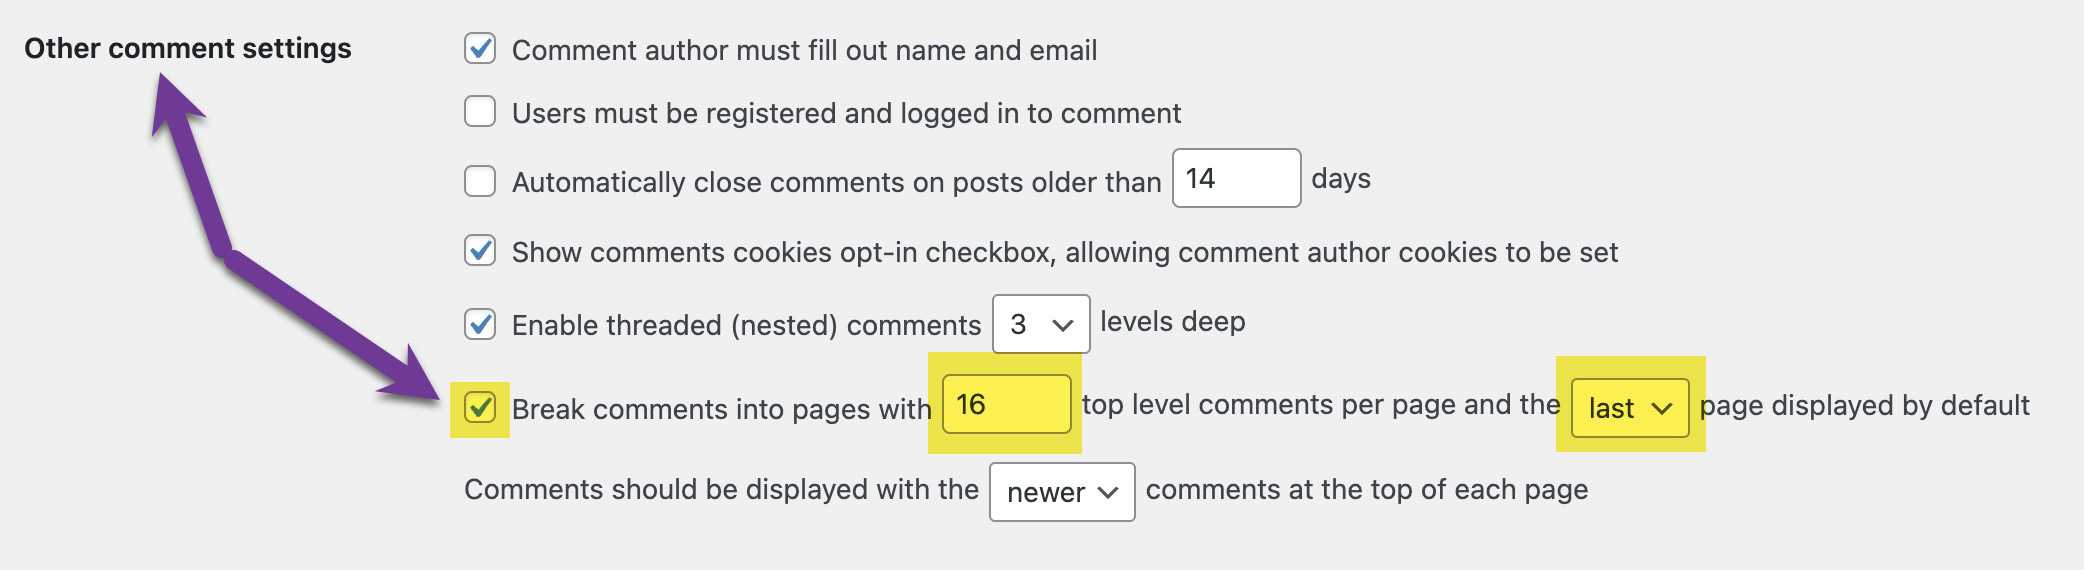 WordPress Other comment settings under the Discussion settings set to break comments into 16 top-level comments per page, with the last page displayed by default.